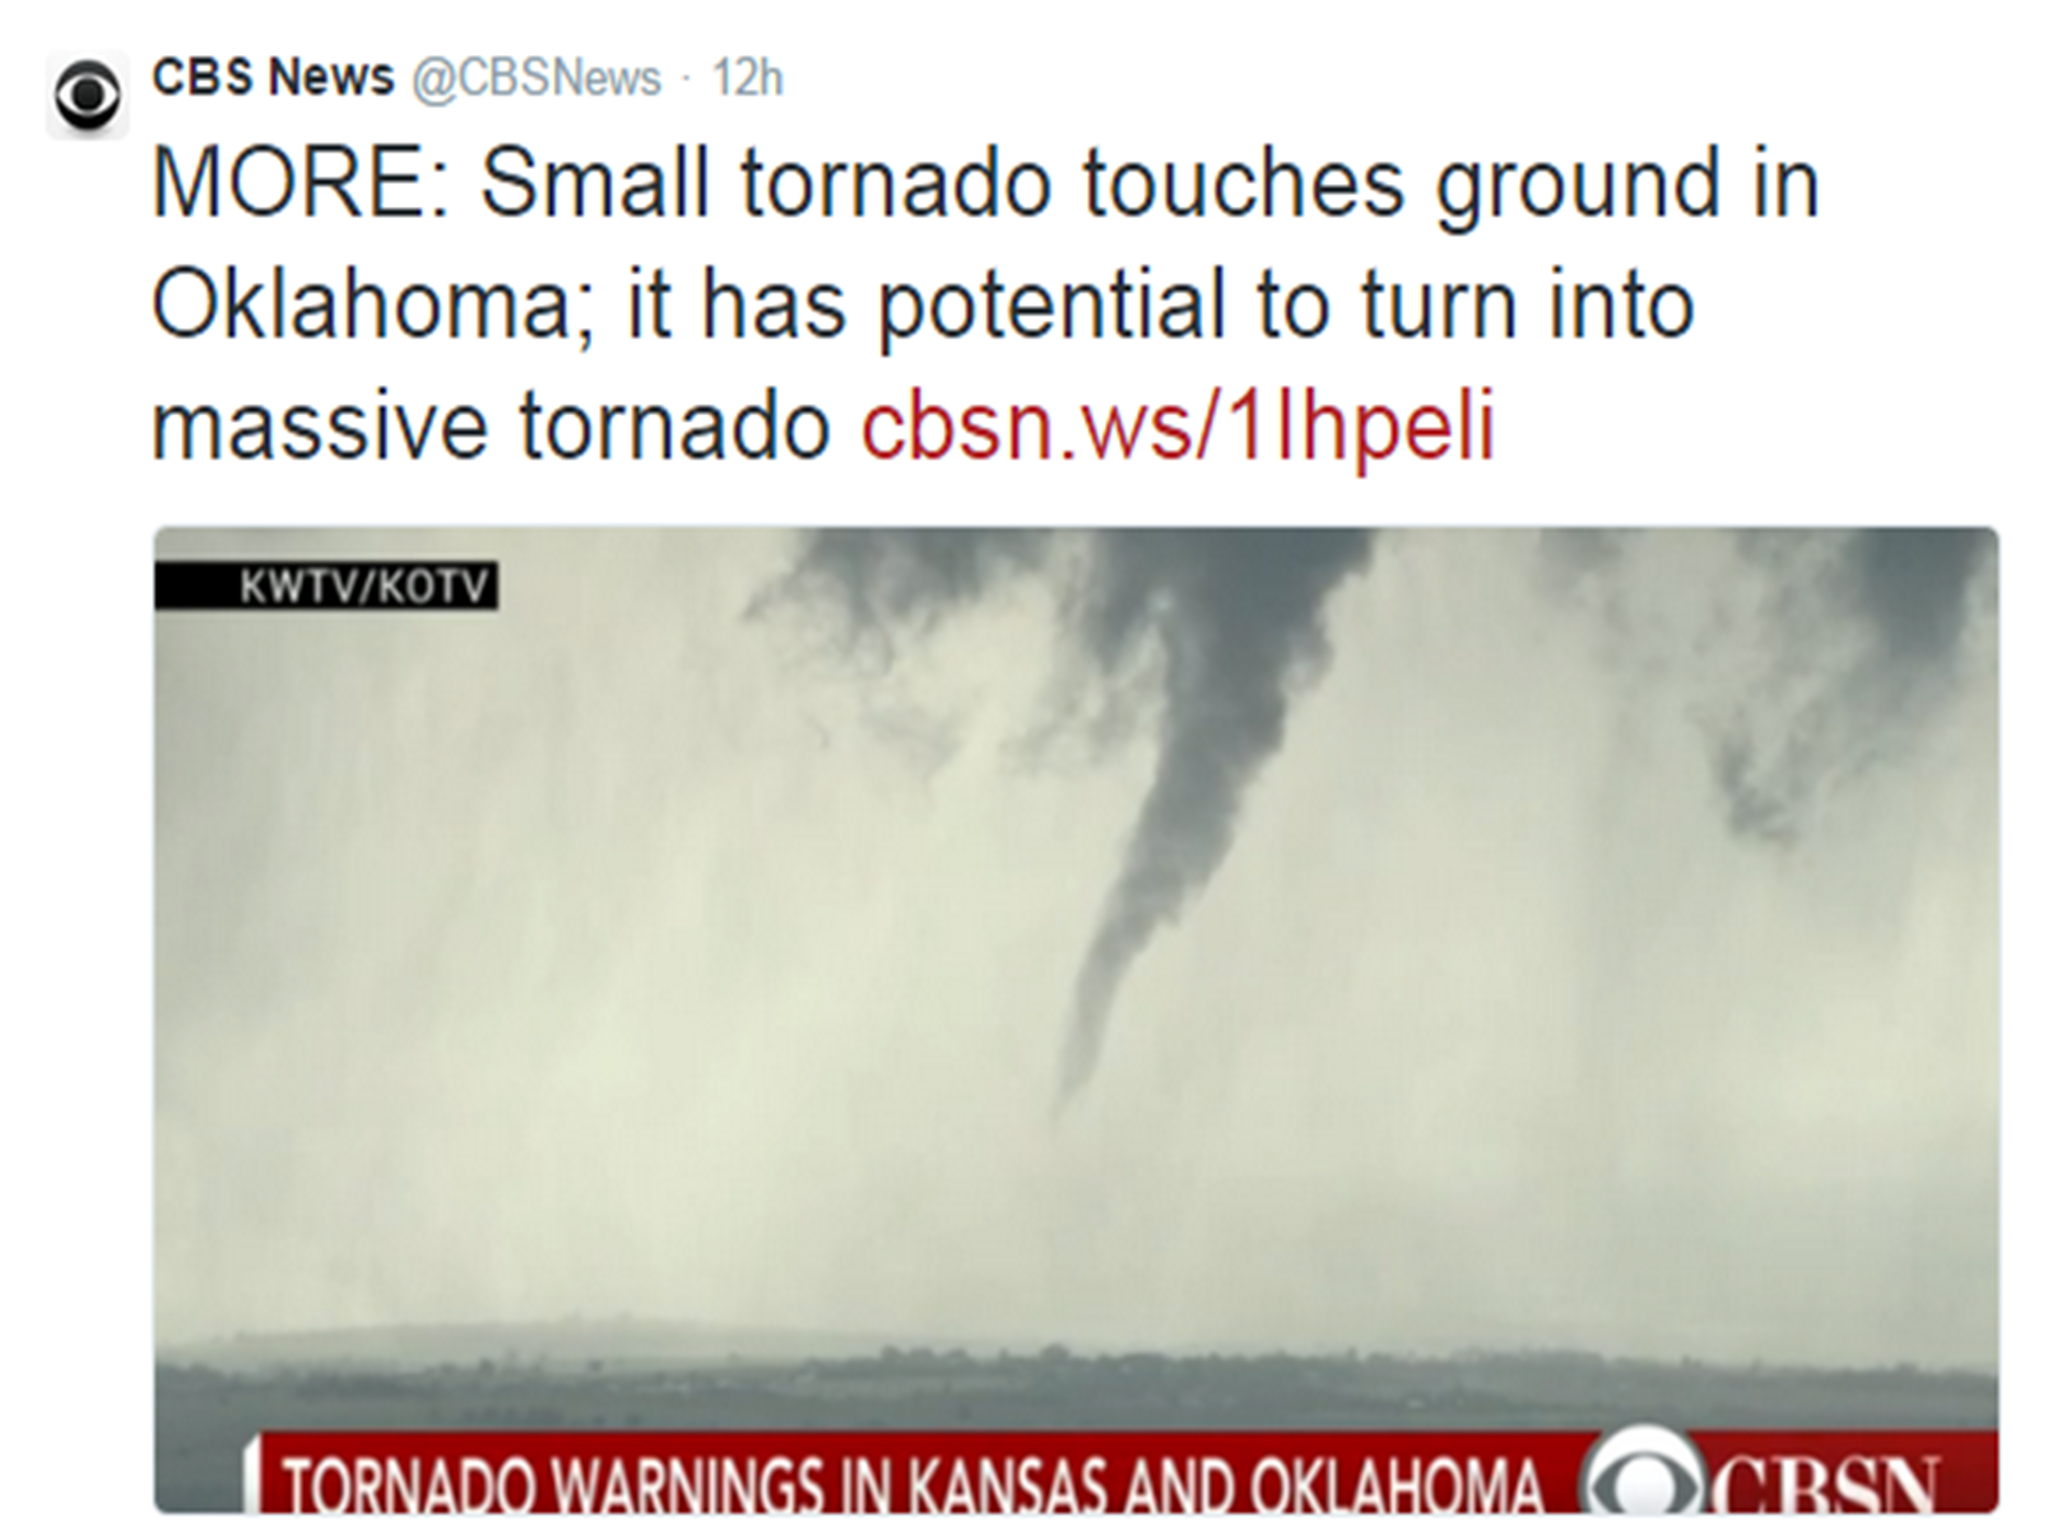 CBS then suggested that the tornado had 'the potential' to become massive